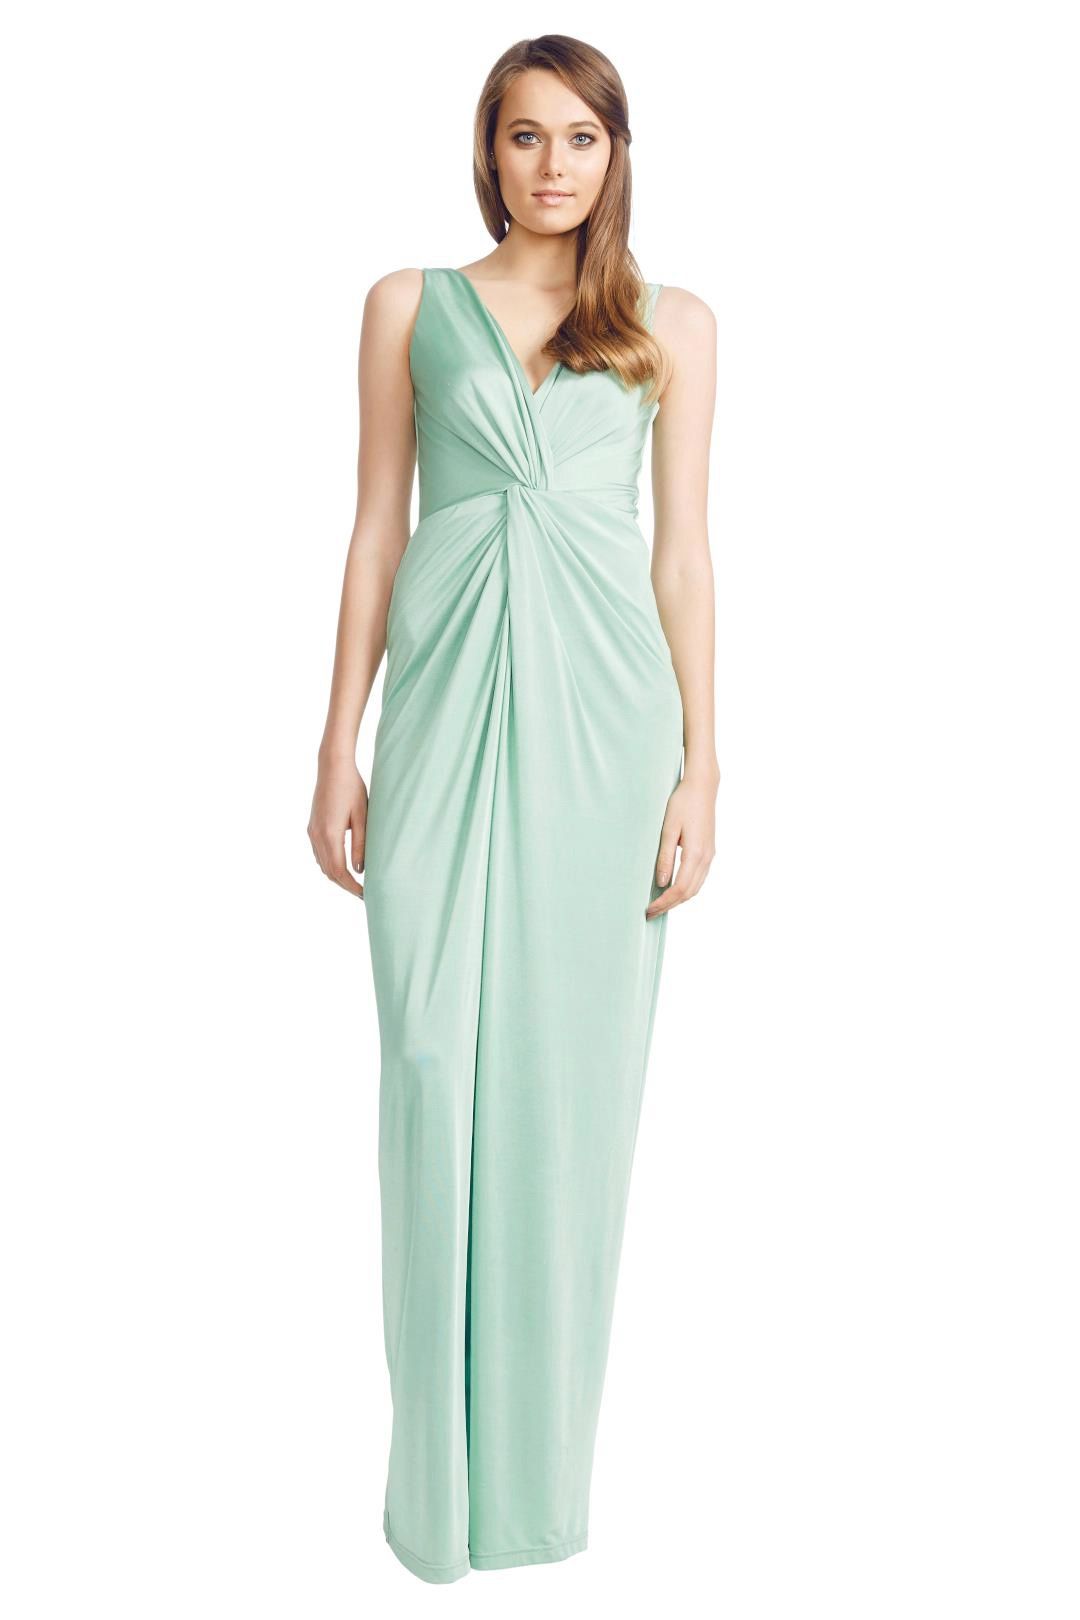 George - Apple Carulli Gown - Green - Front